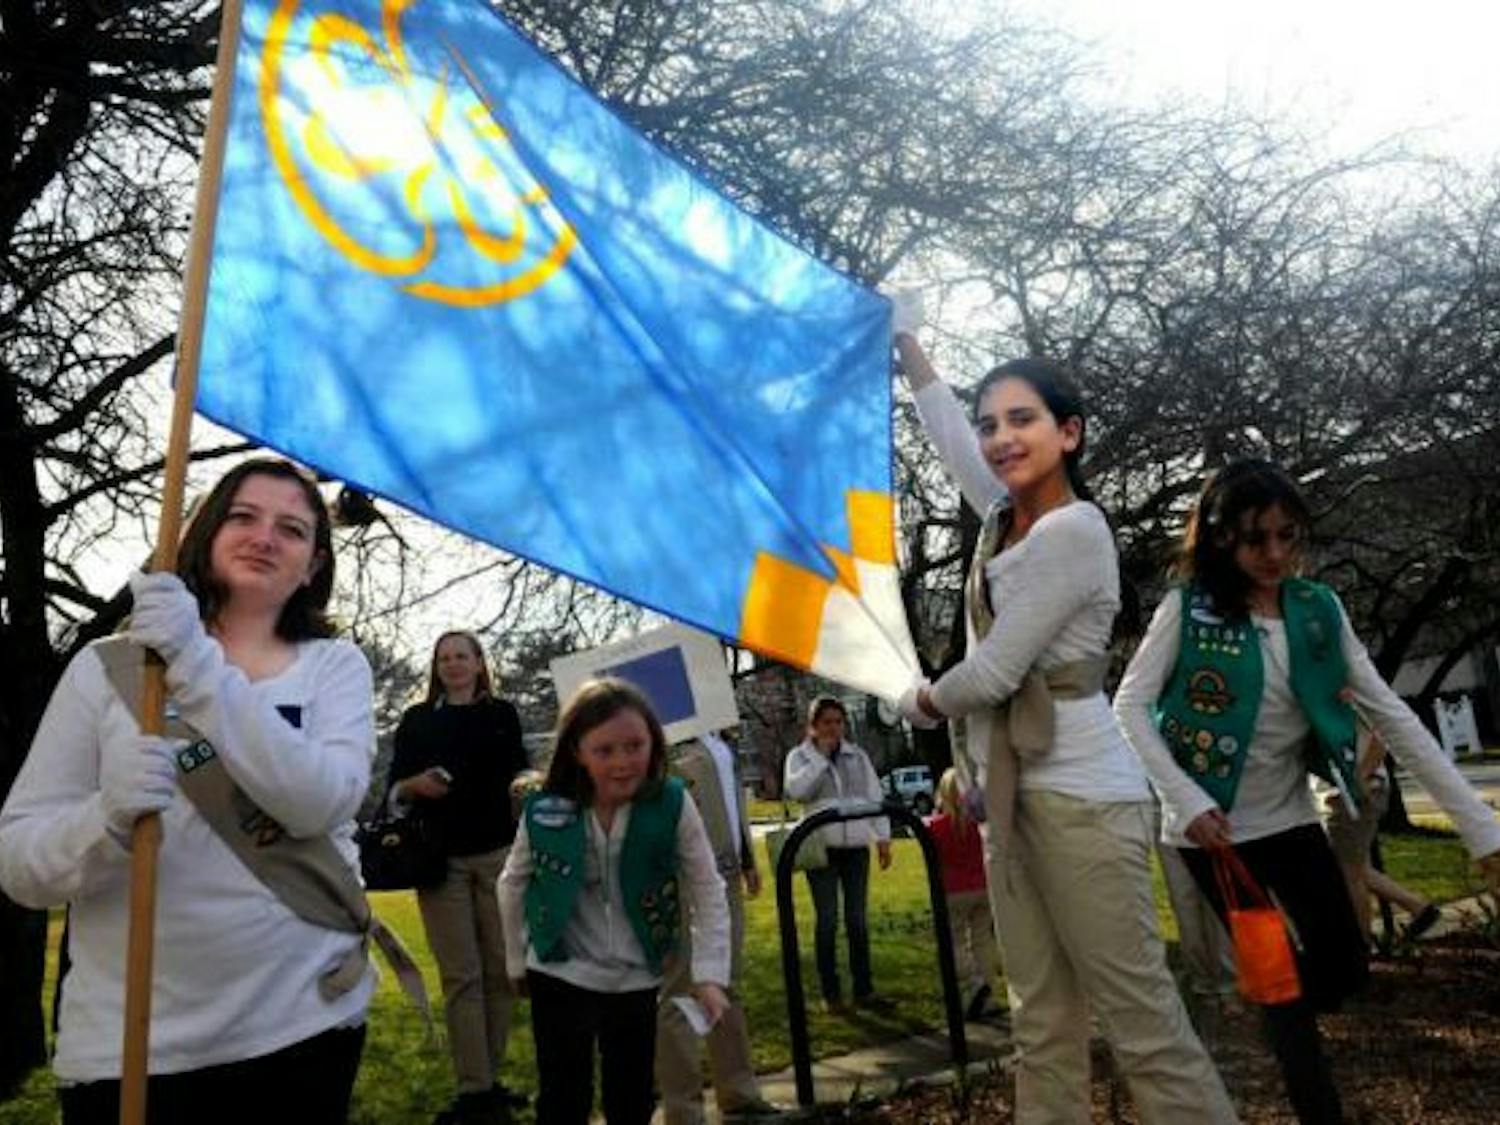 A lot can be learned from the Girl Scouts, which believes in a law that requires girls to, “respect (themselves) and others,” and “use resources wisely.”